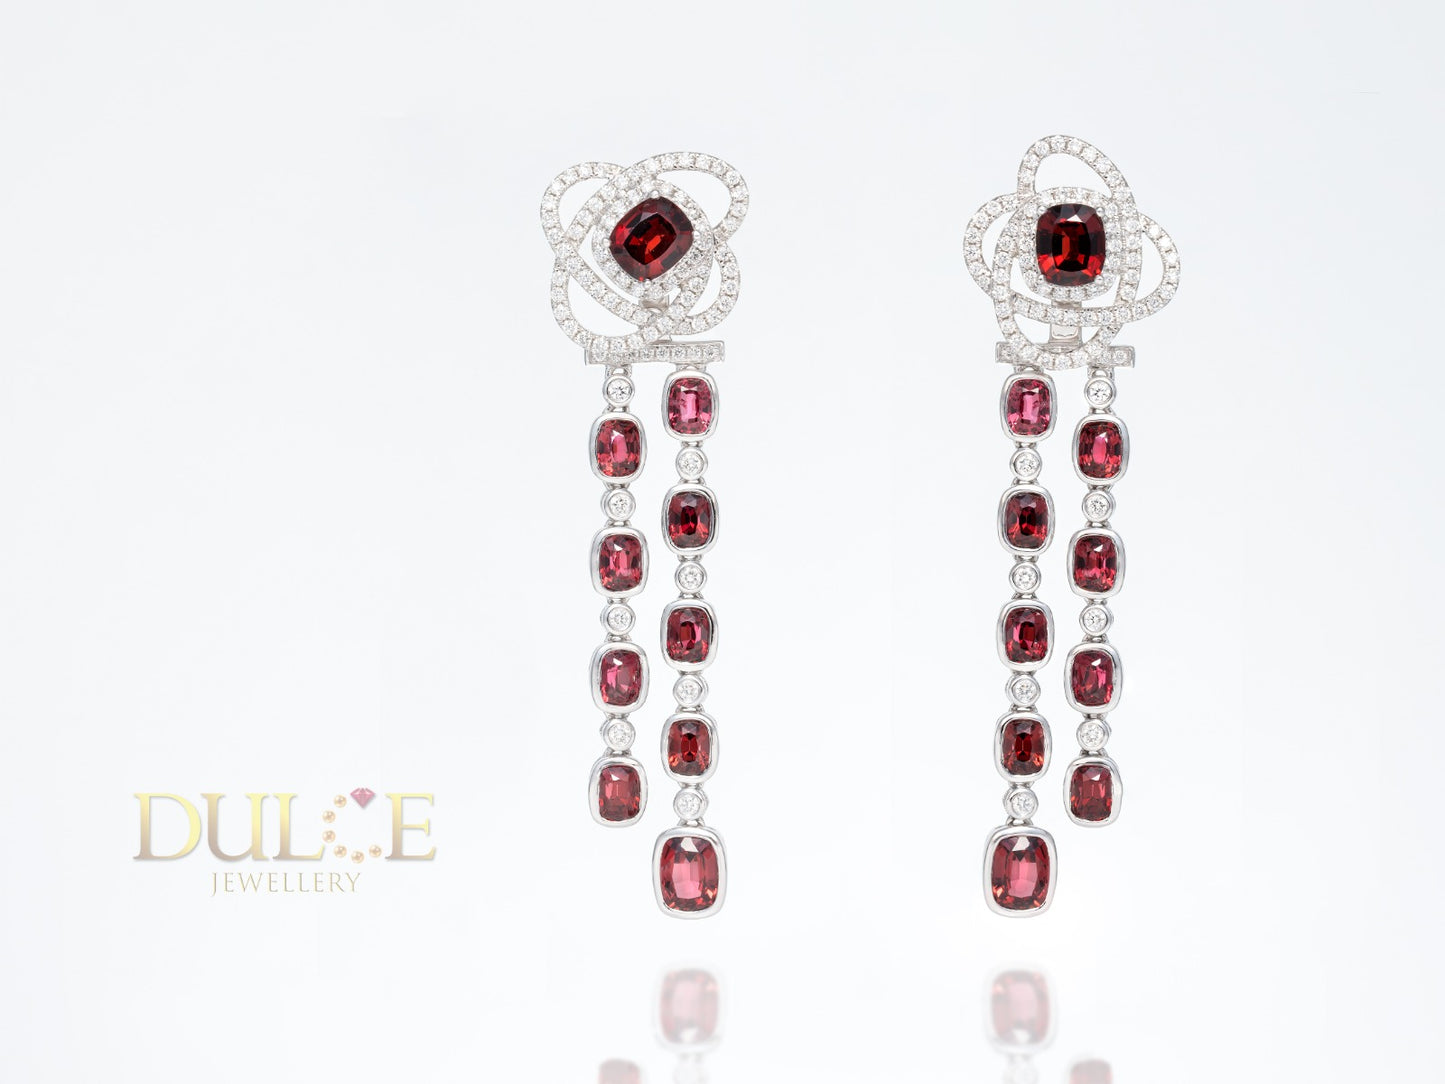 18K Gold Red Spinel Diamond Jackets (Red Spinel Earrings not included)(GERSPINEL2398)